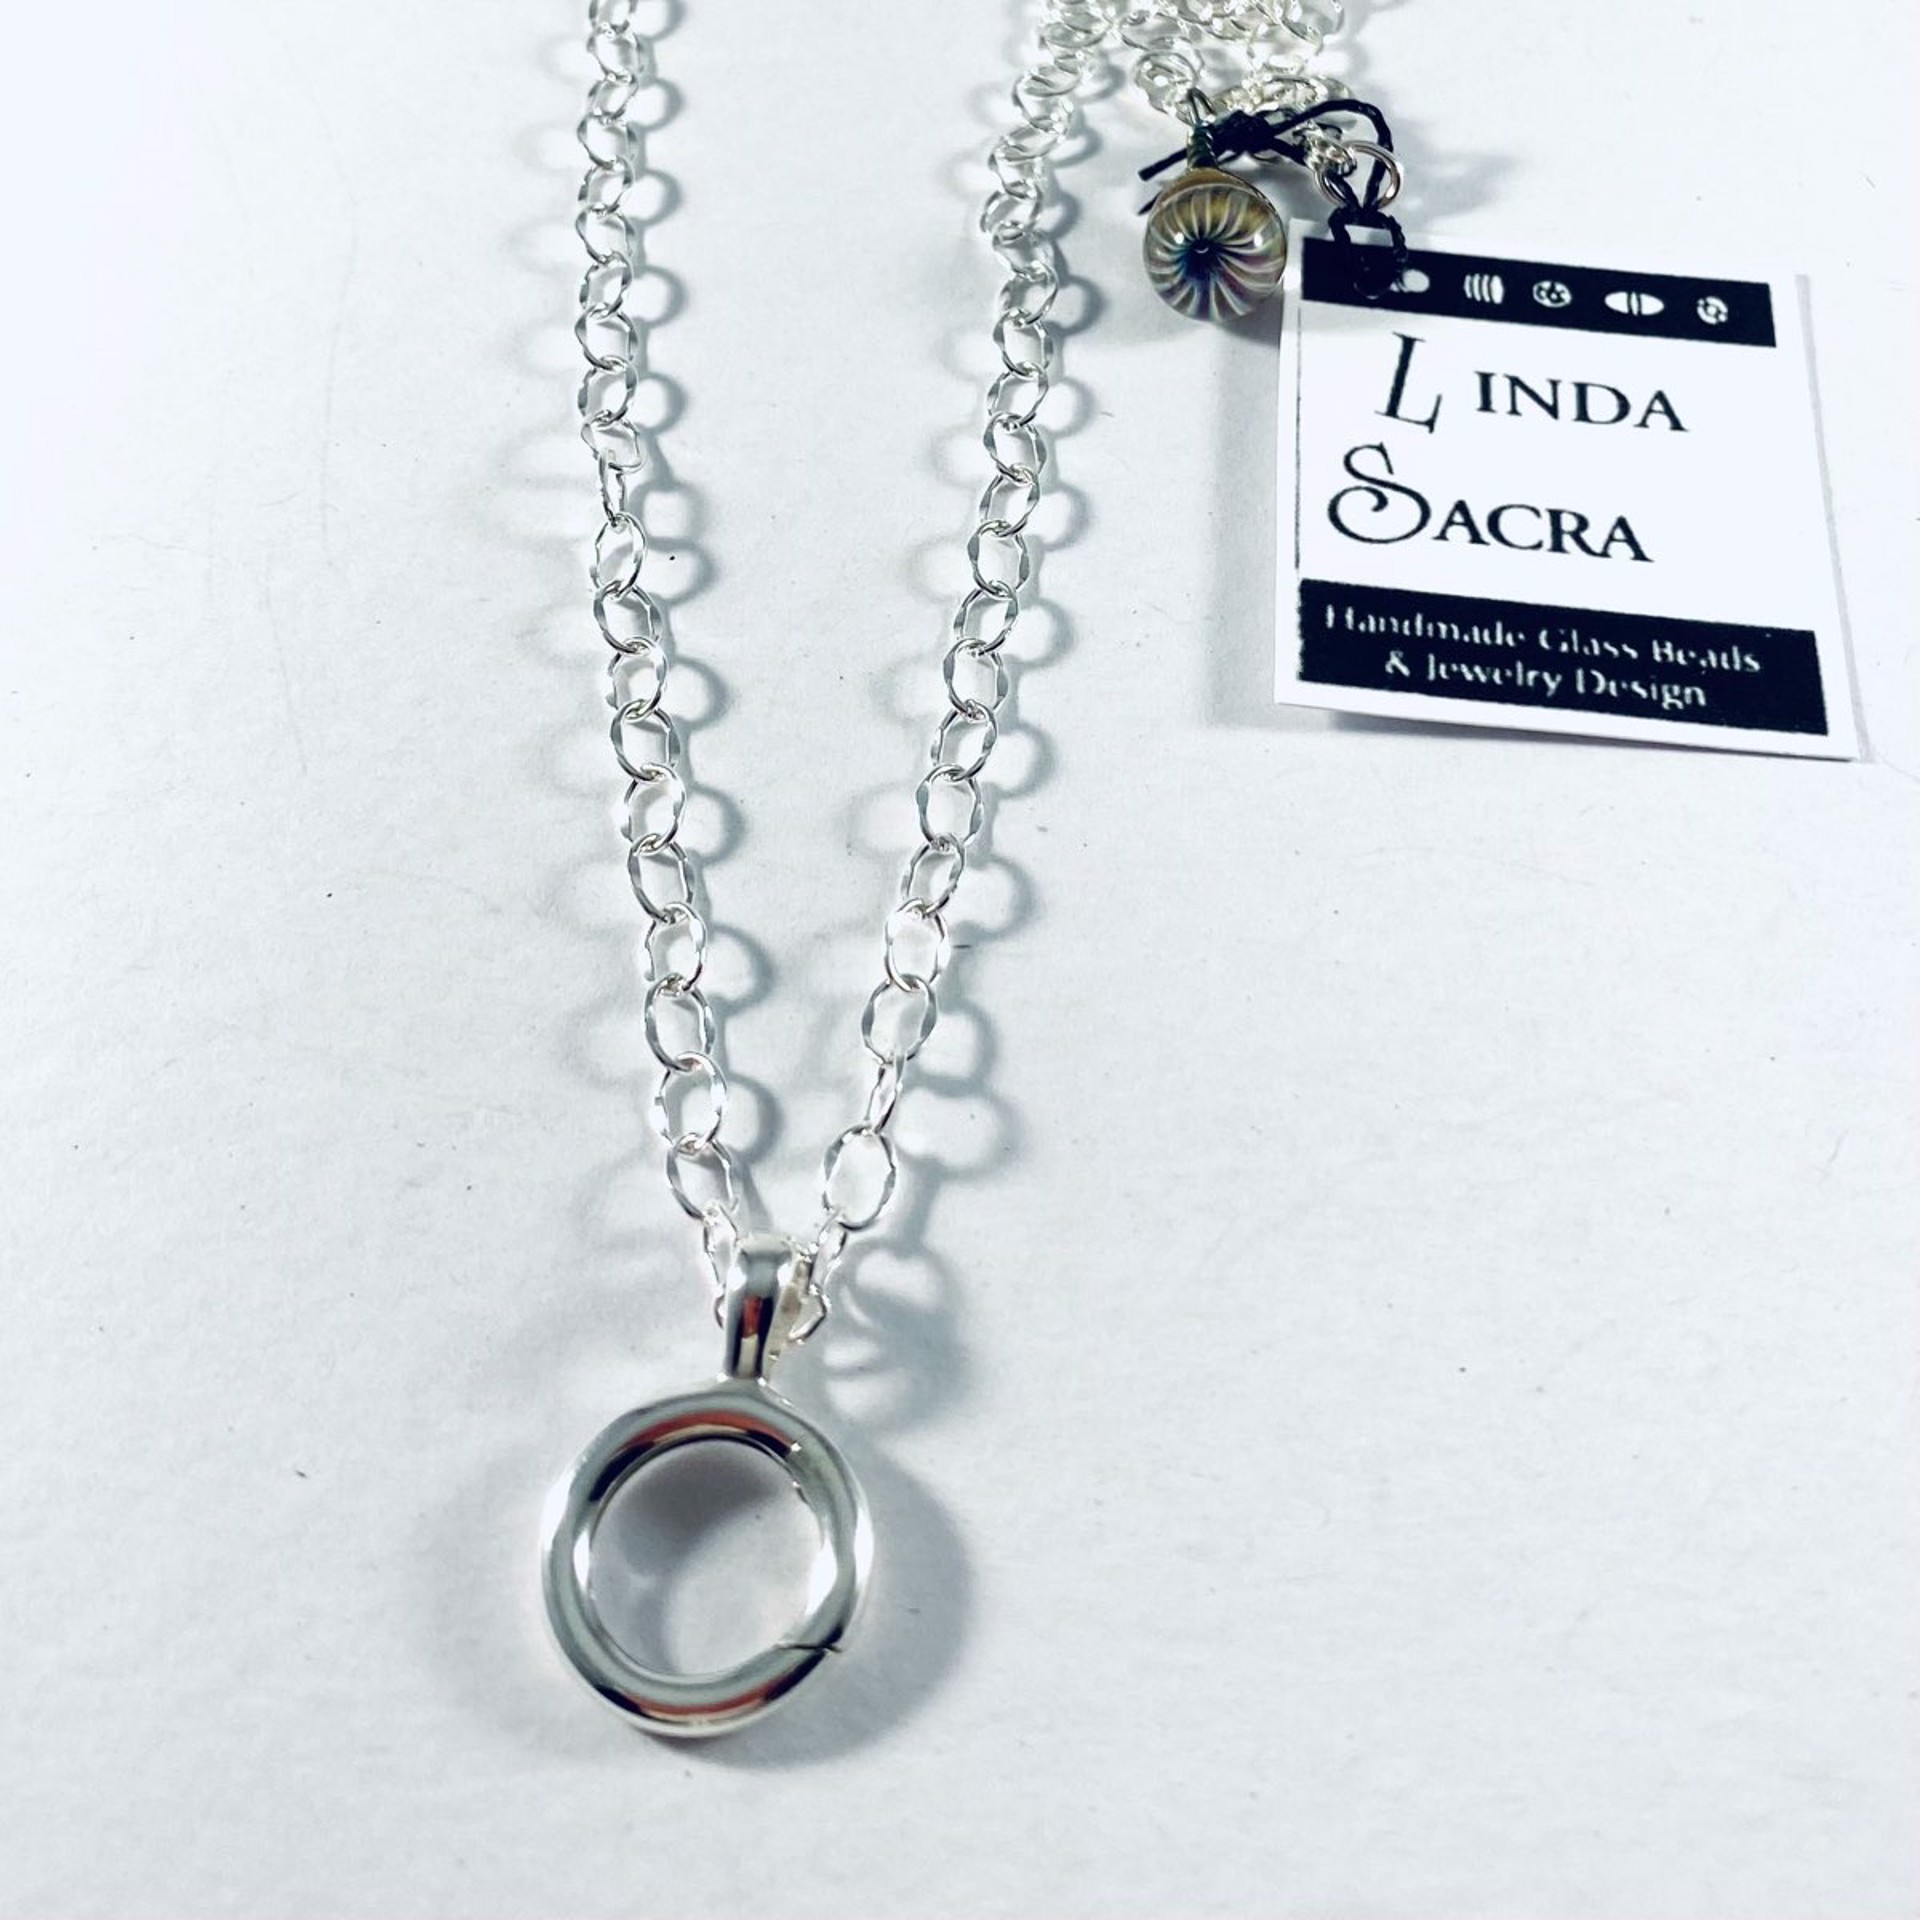 Silver 20” Oval Cable Chain Necklace with Charm Holder LS21-10 by Linda Sacra